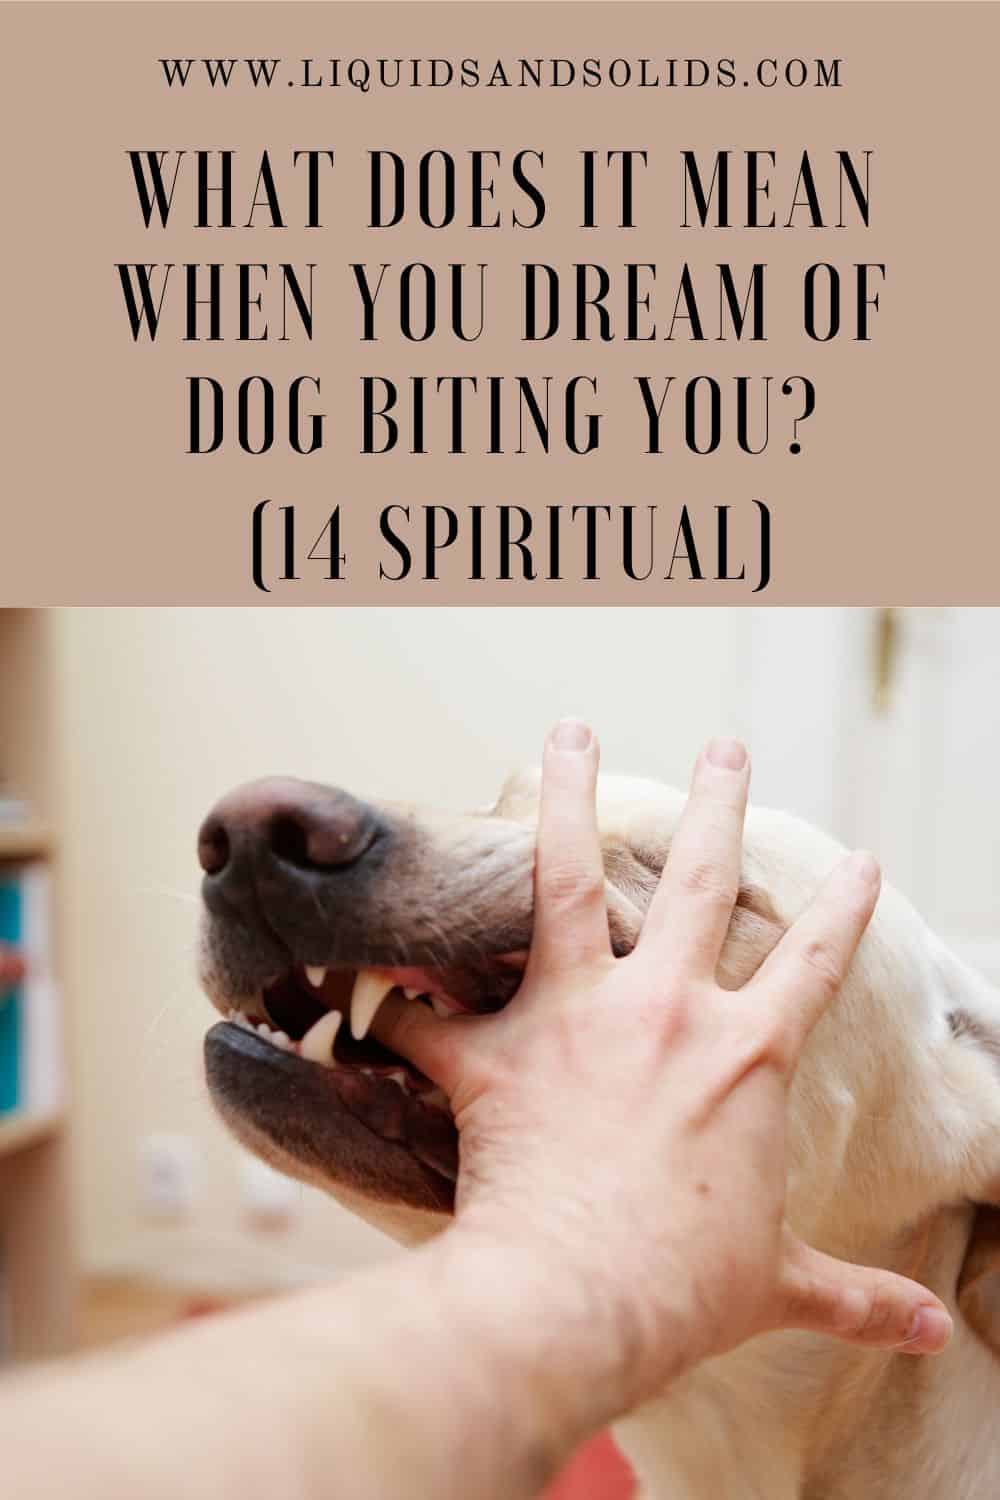 What Does It Mean When You Dream Of Dog Biting You (14 Spiritual)